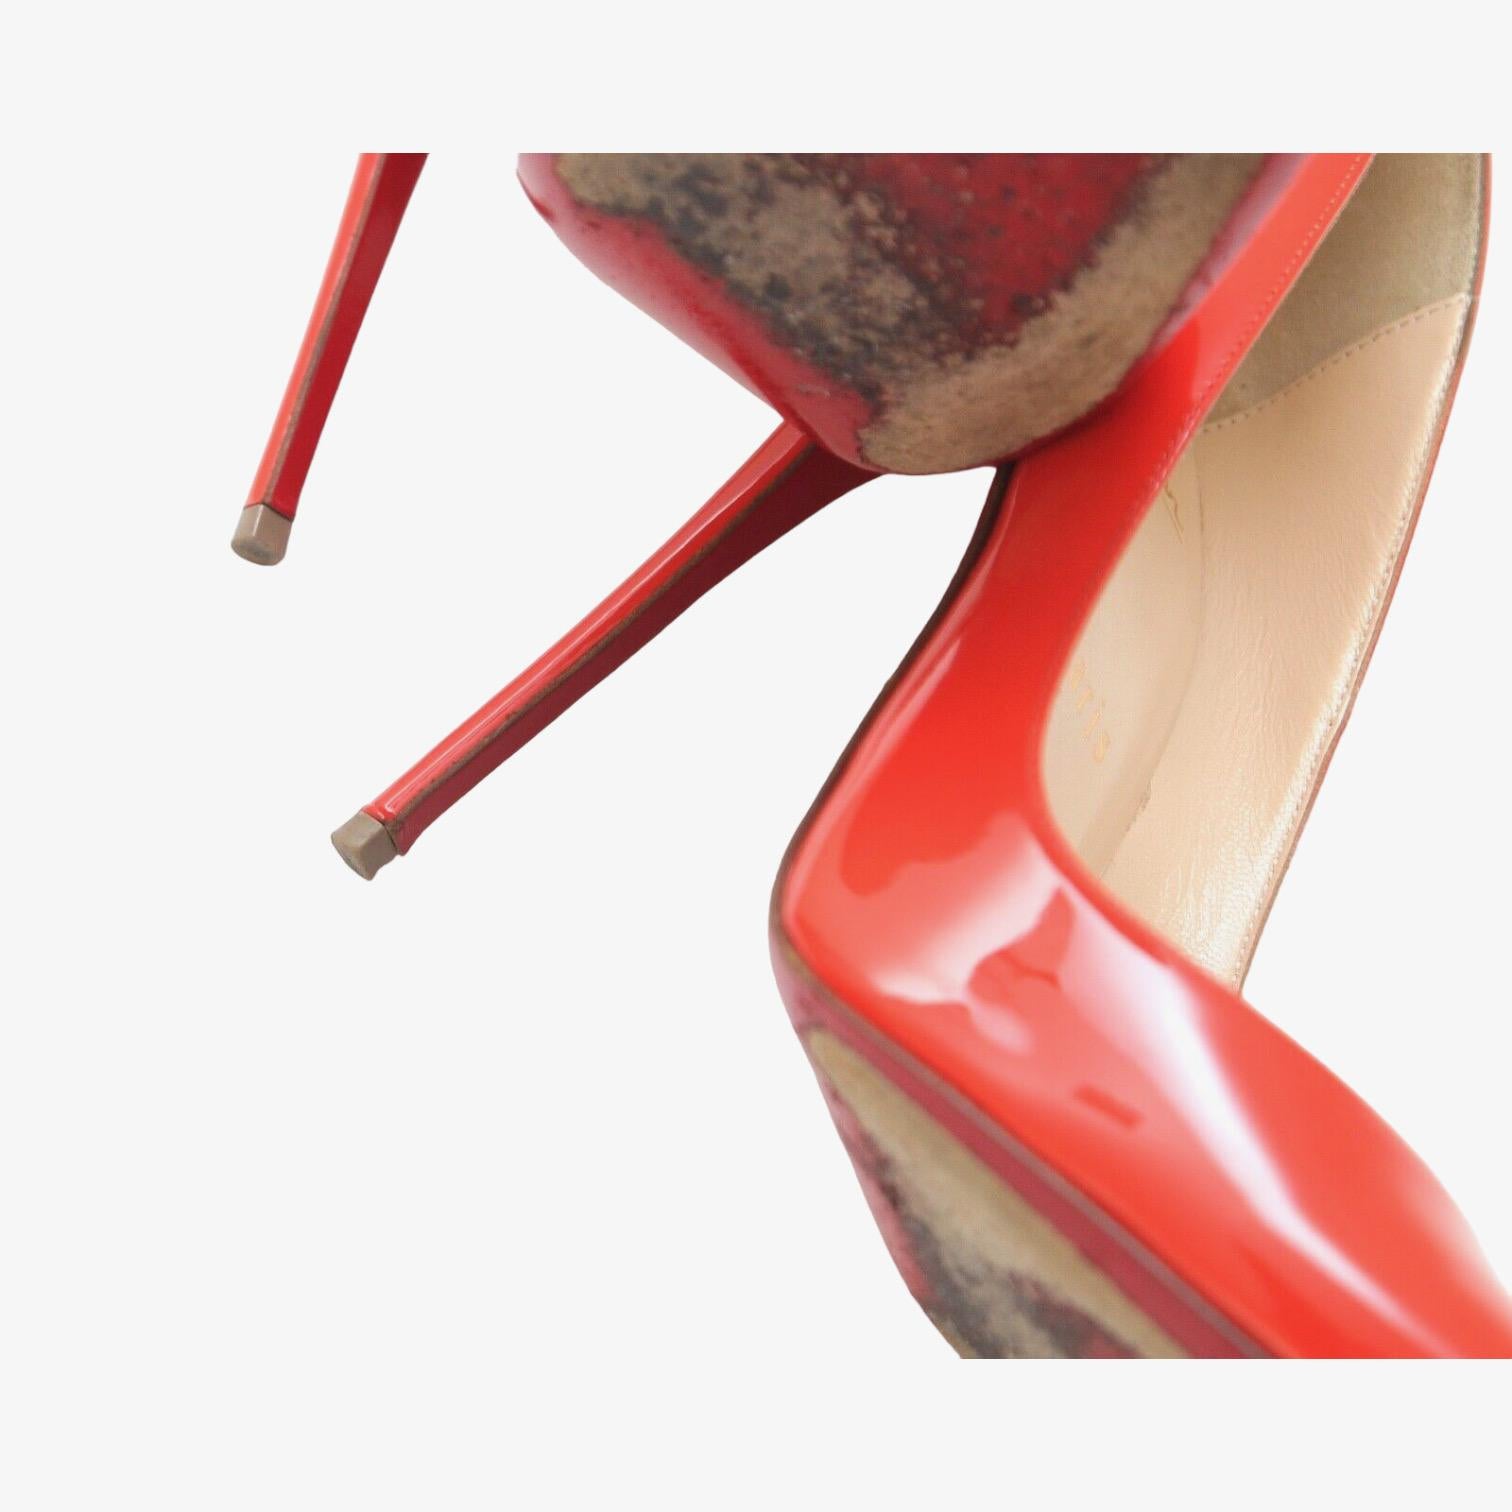 CHRISTIAN LOUBOUTIN Patent Leather Pump ORANGE SO KATE 120 Pointed Toe 38 For Sale 3